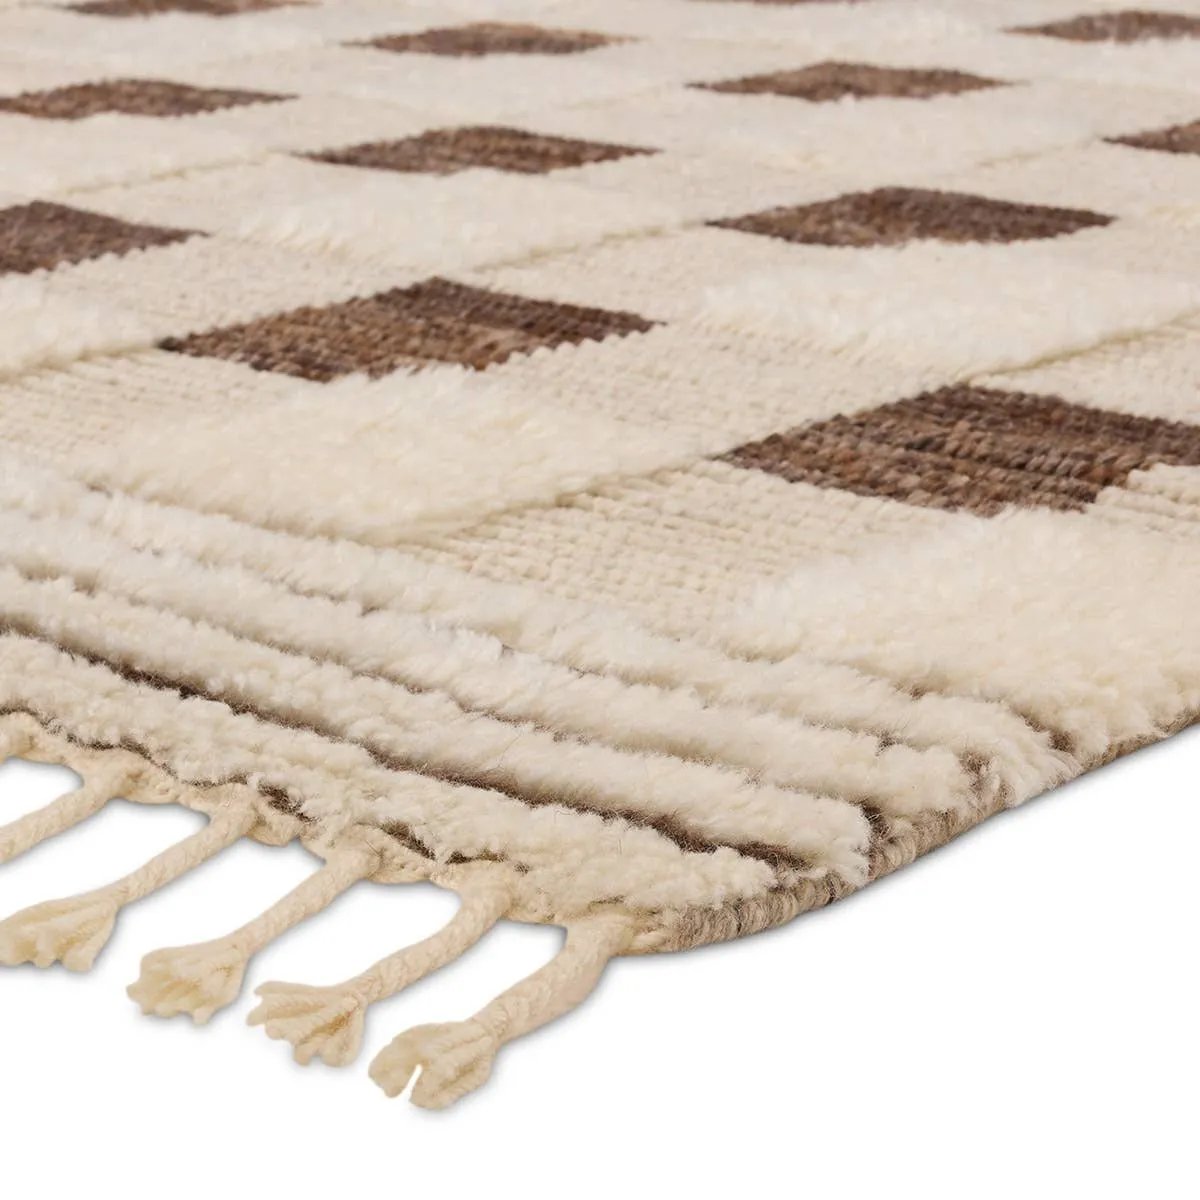 The Desouk Berkshire melds modern allure with the global vibes of Morocco. The Berkshire hand-knotted rug showcases a geometric grid pattern with contrasting brown, cream, and tan tones. This handcrafted rug boasts plush, cut wool pile that pairs beautifully with braided tassel details. Amethyst Home provides interior design, new home construction design consulting, vintage area rugs, and lighting in the Scottsdale metro area.